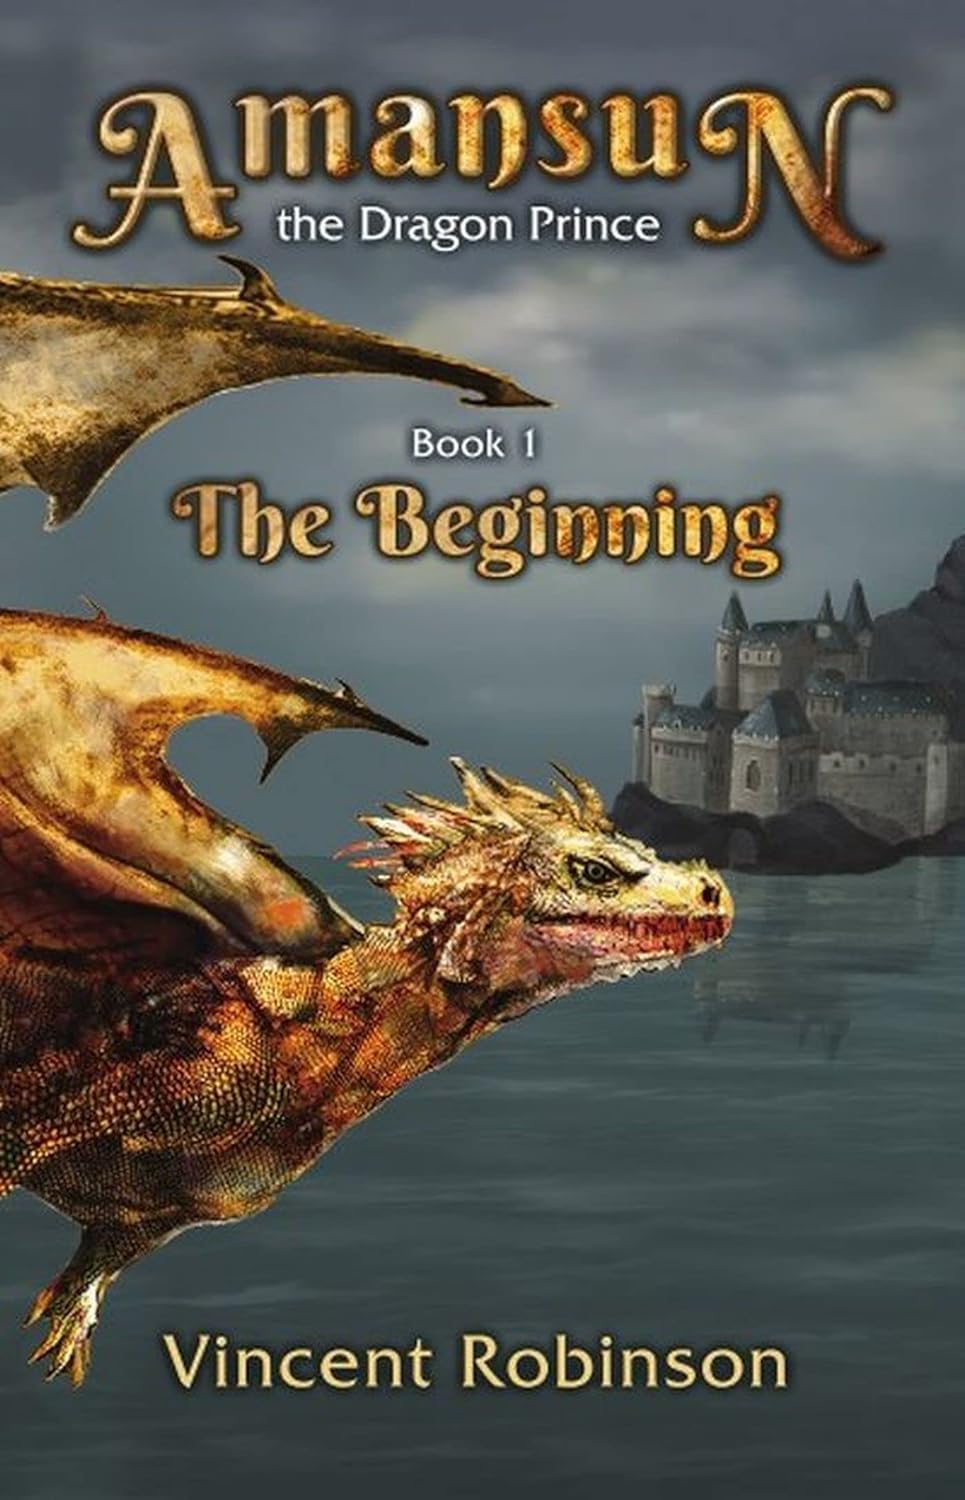 New novel "Amansun the Dragon Prince: Book 1 - The Beginning" by Vincent Robinson is released, the first in a series of fantasy novels following an outcast dragon on an epic quest to find himself